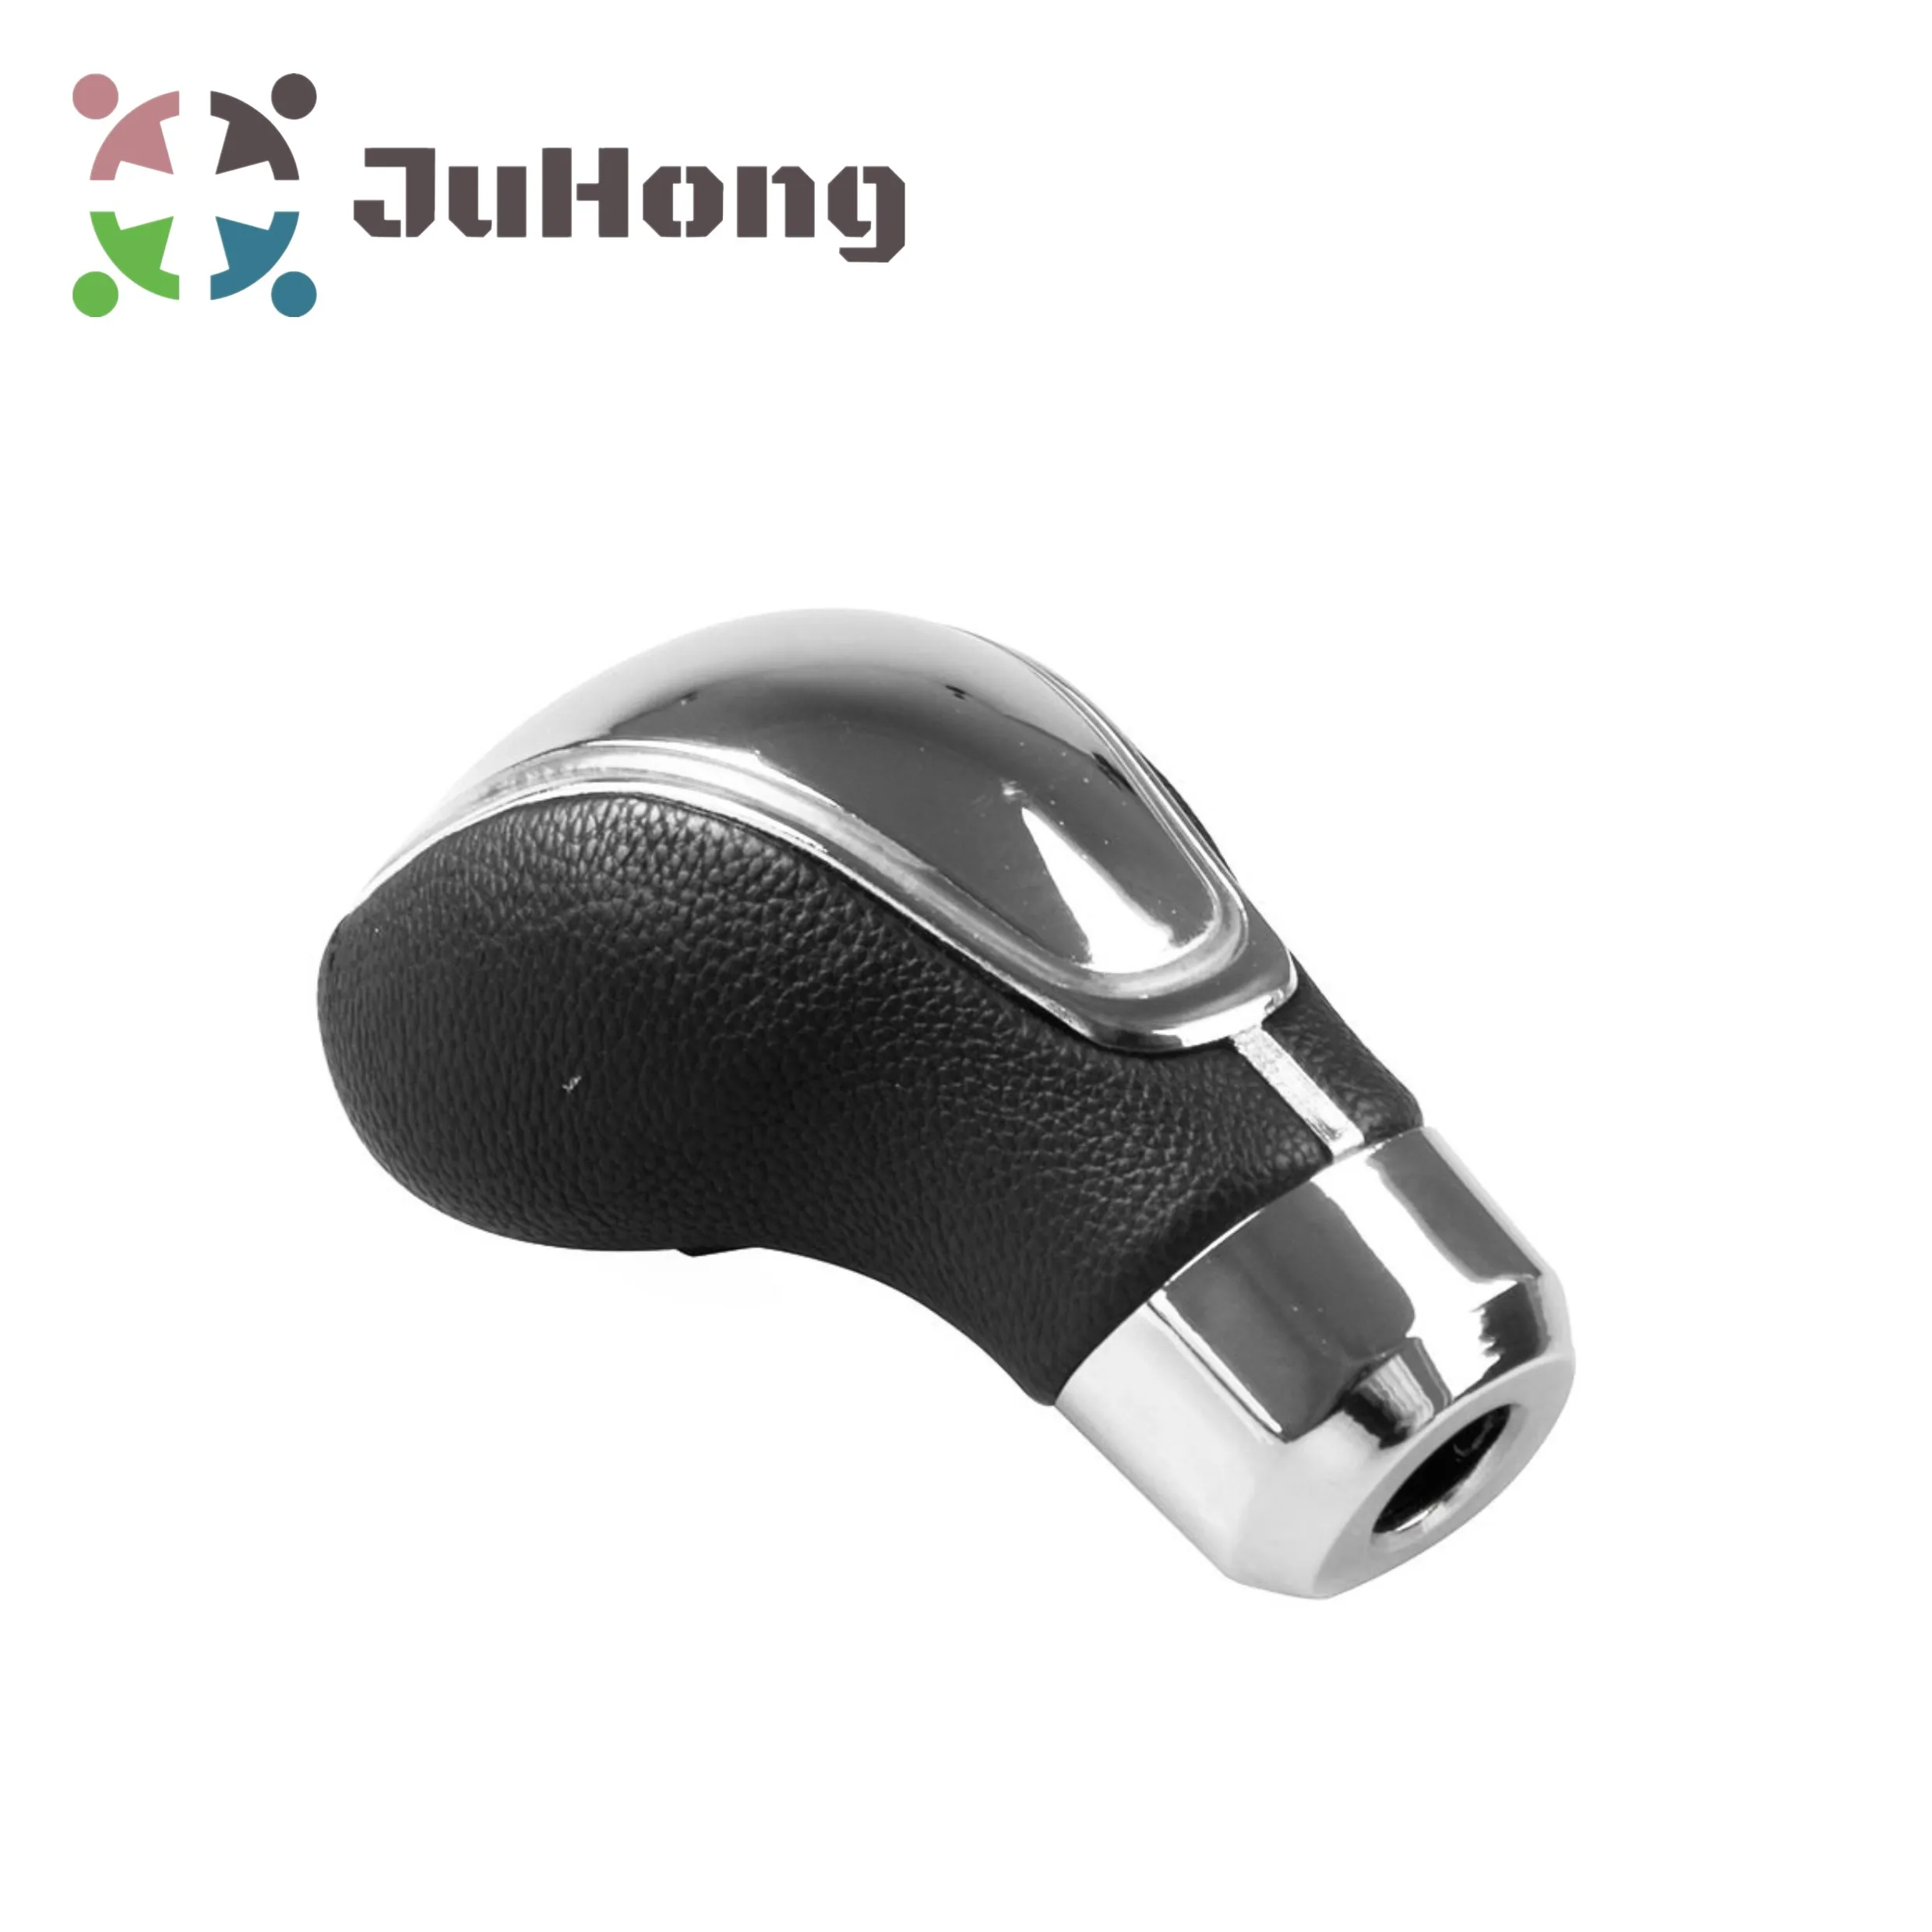 
Universal Decorative Car Accessories PU Leather Gear Bar Personality Refit LED Light Gearboxer Head Manual Shift Knob 